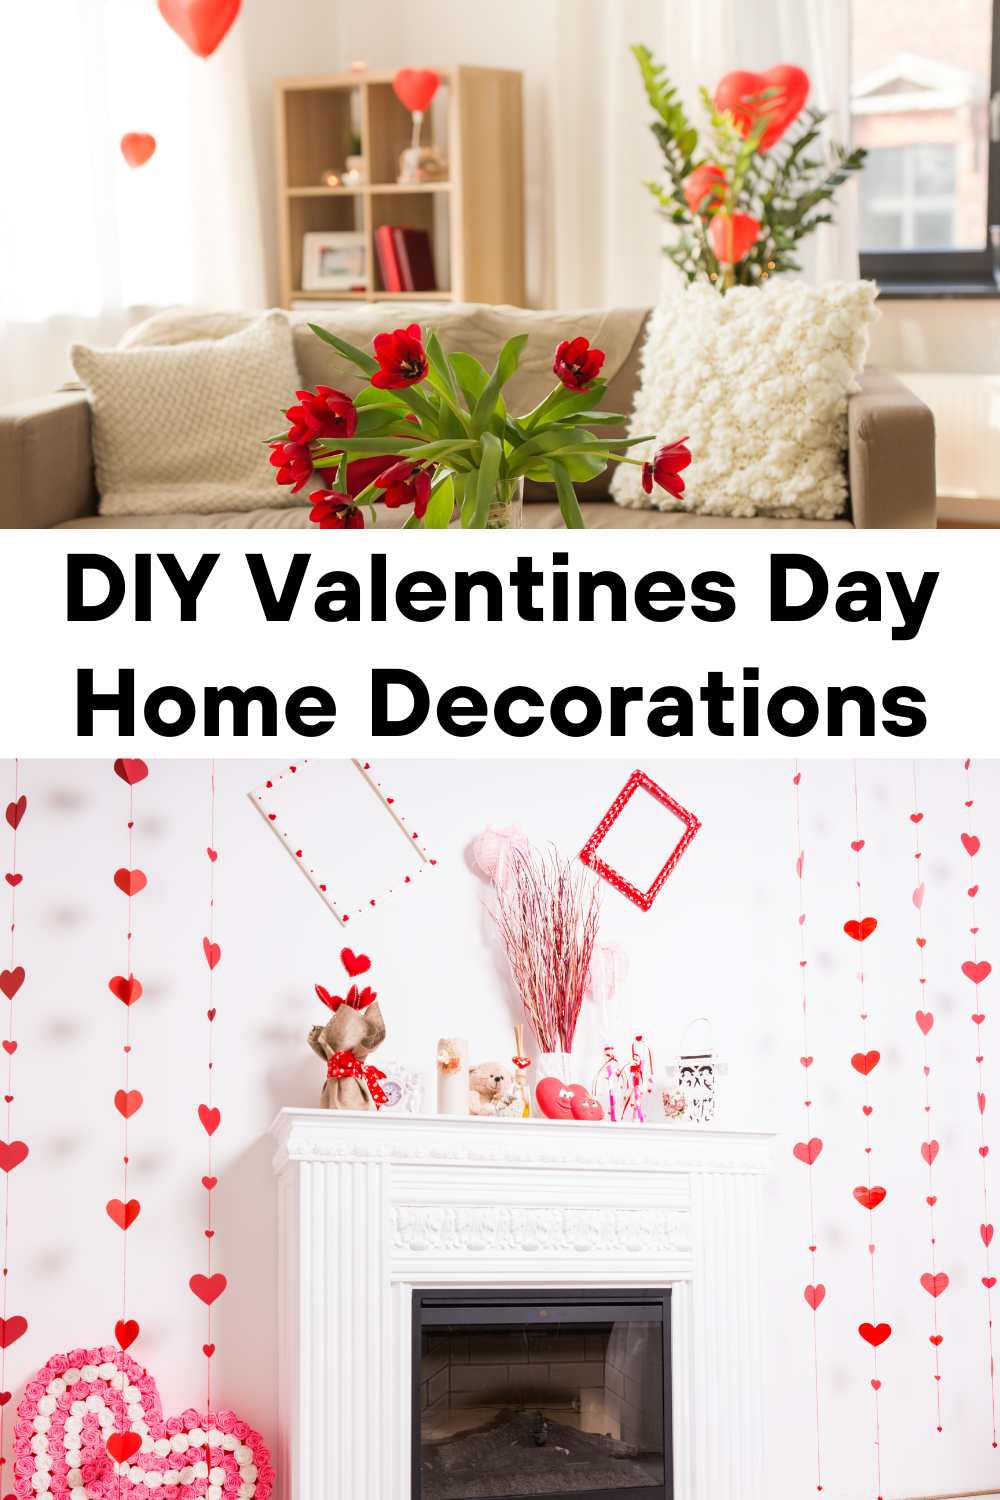 Dining table decor for dinner with a partner on valentine's day 27   Valentine dinner decorations, Valentine table decorations, Valentines party  decor